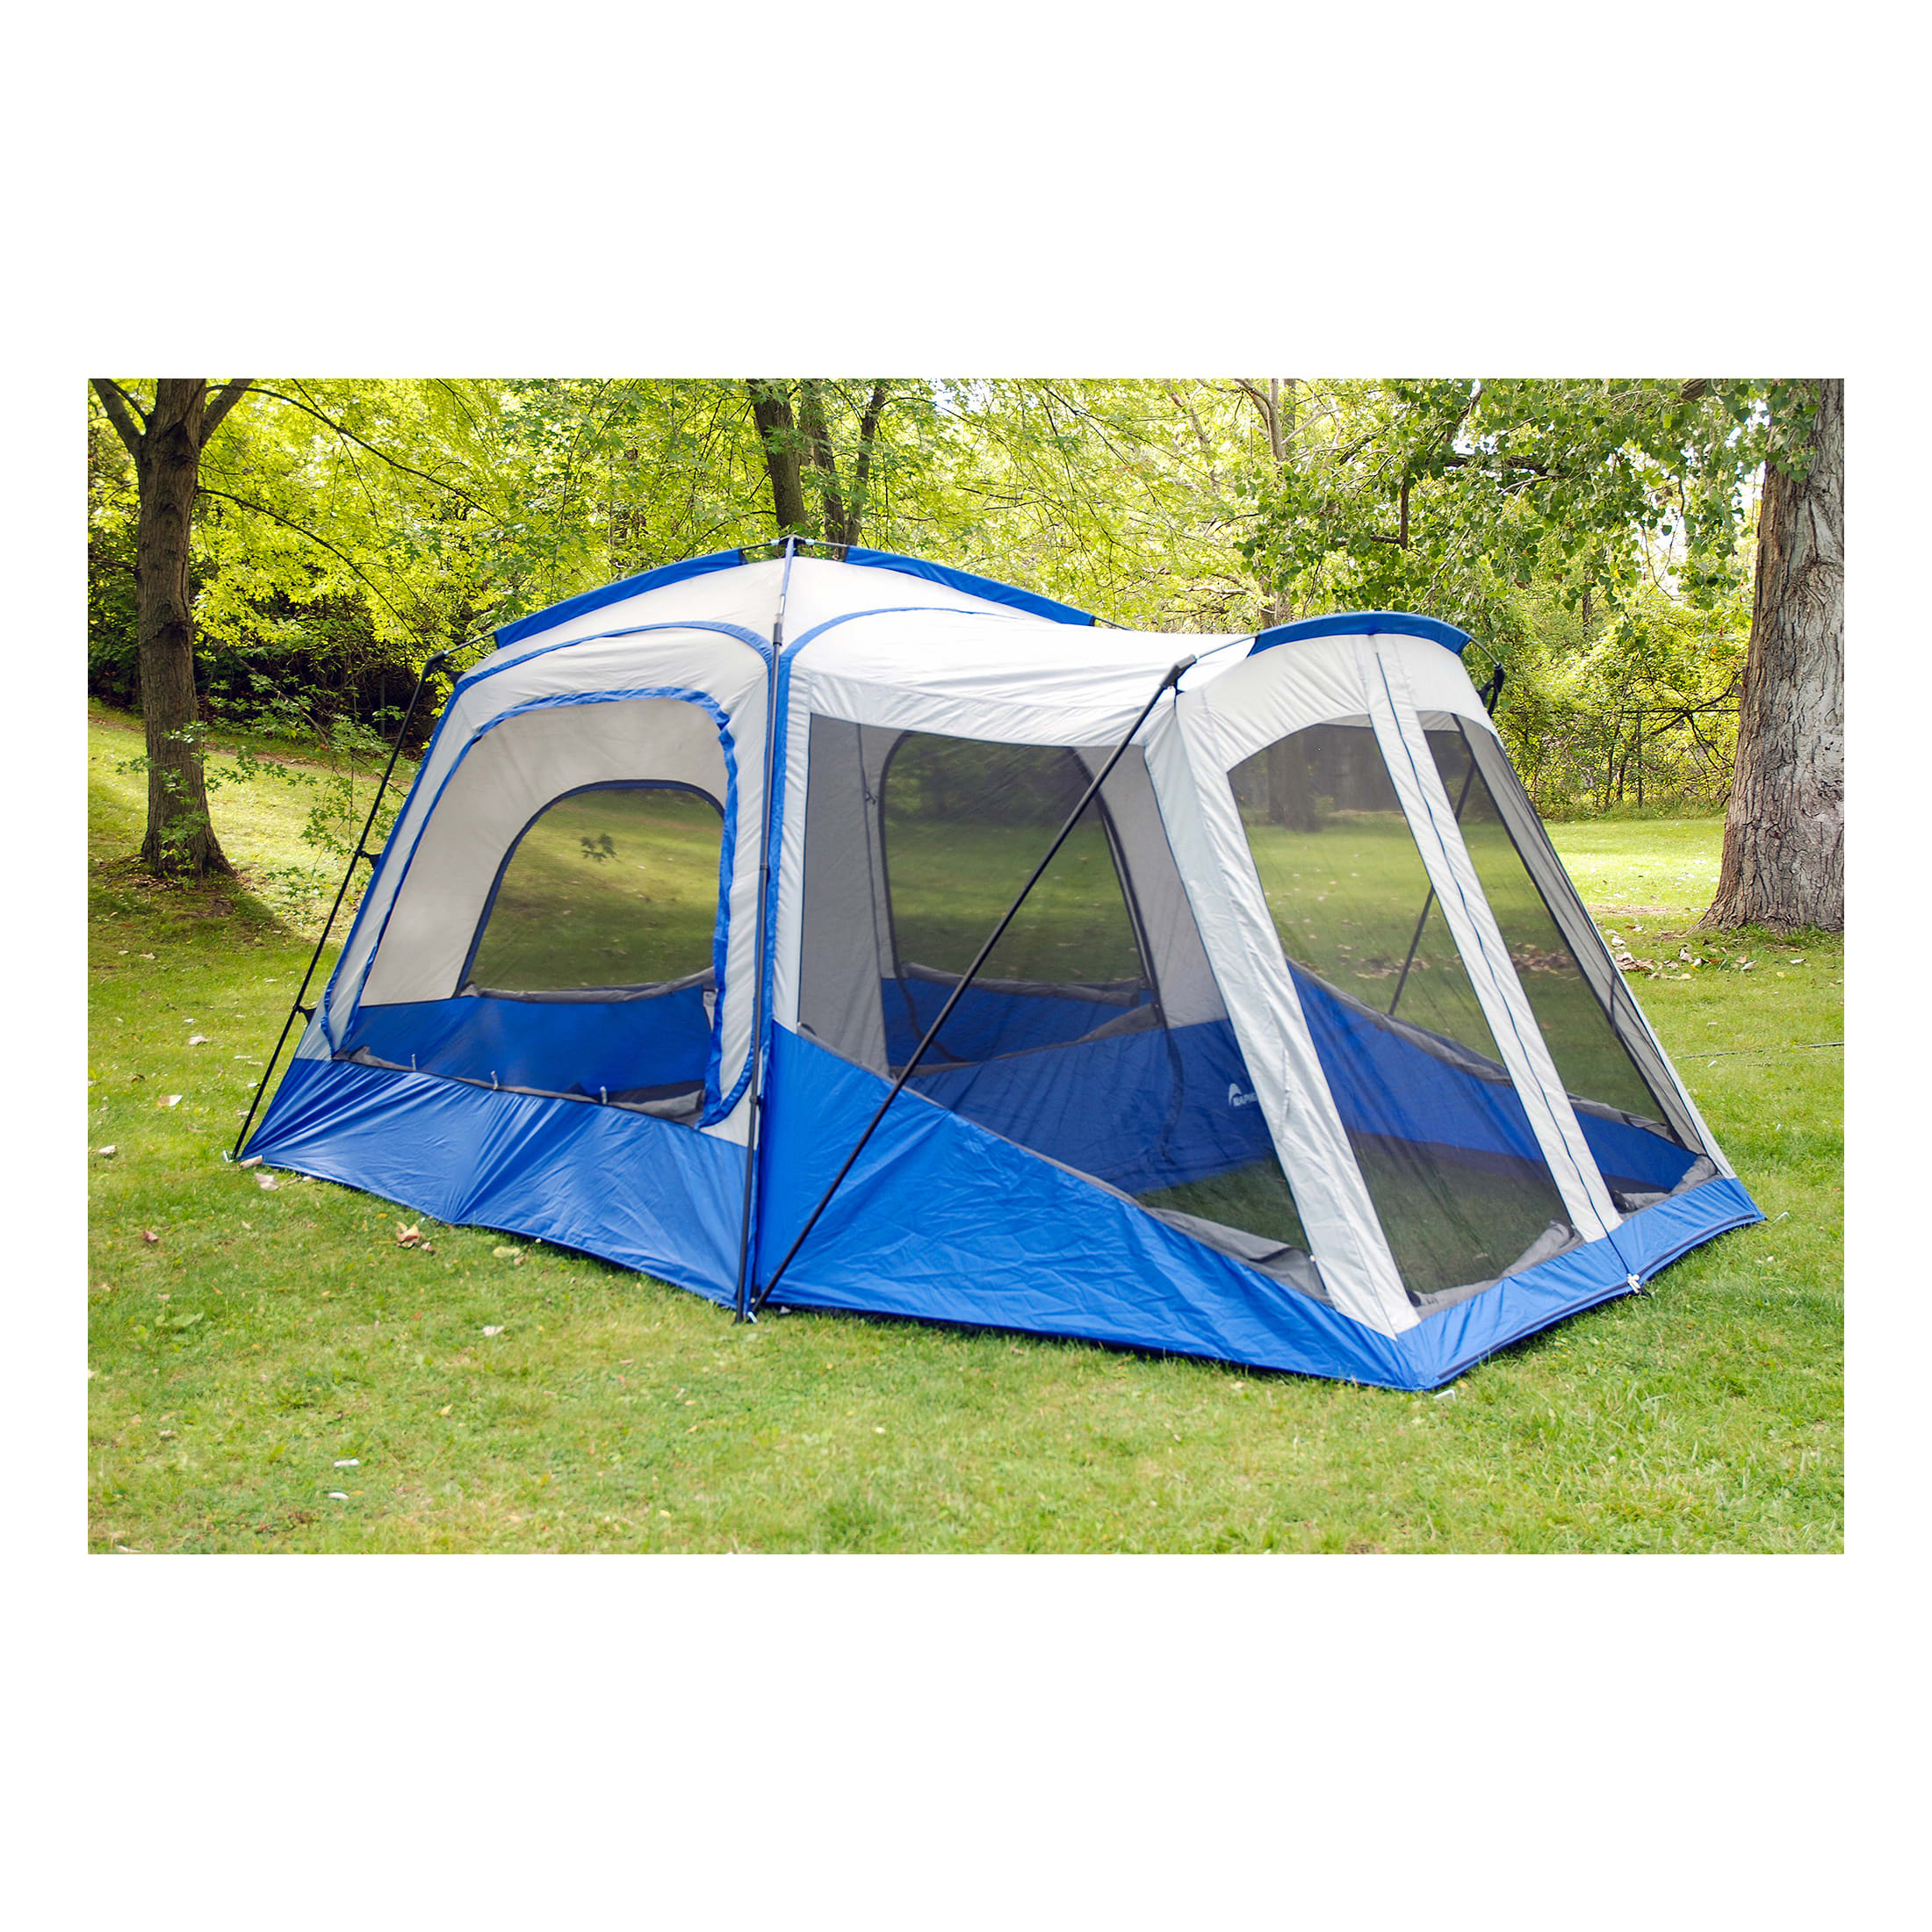 Napier Sportz SUV Tent with Screen Room - standalone